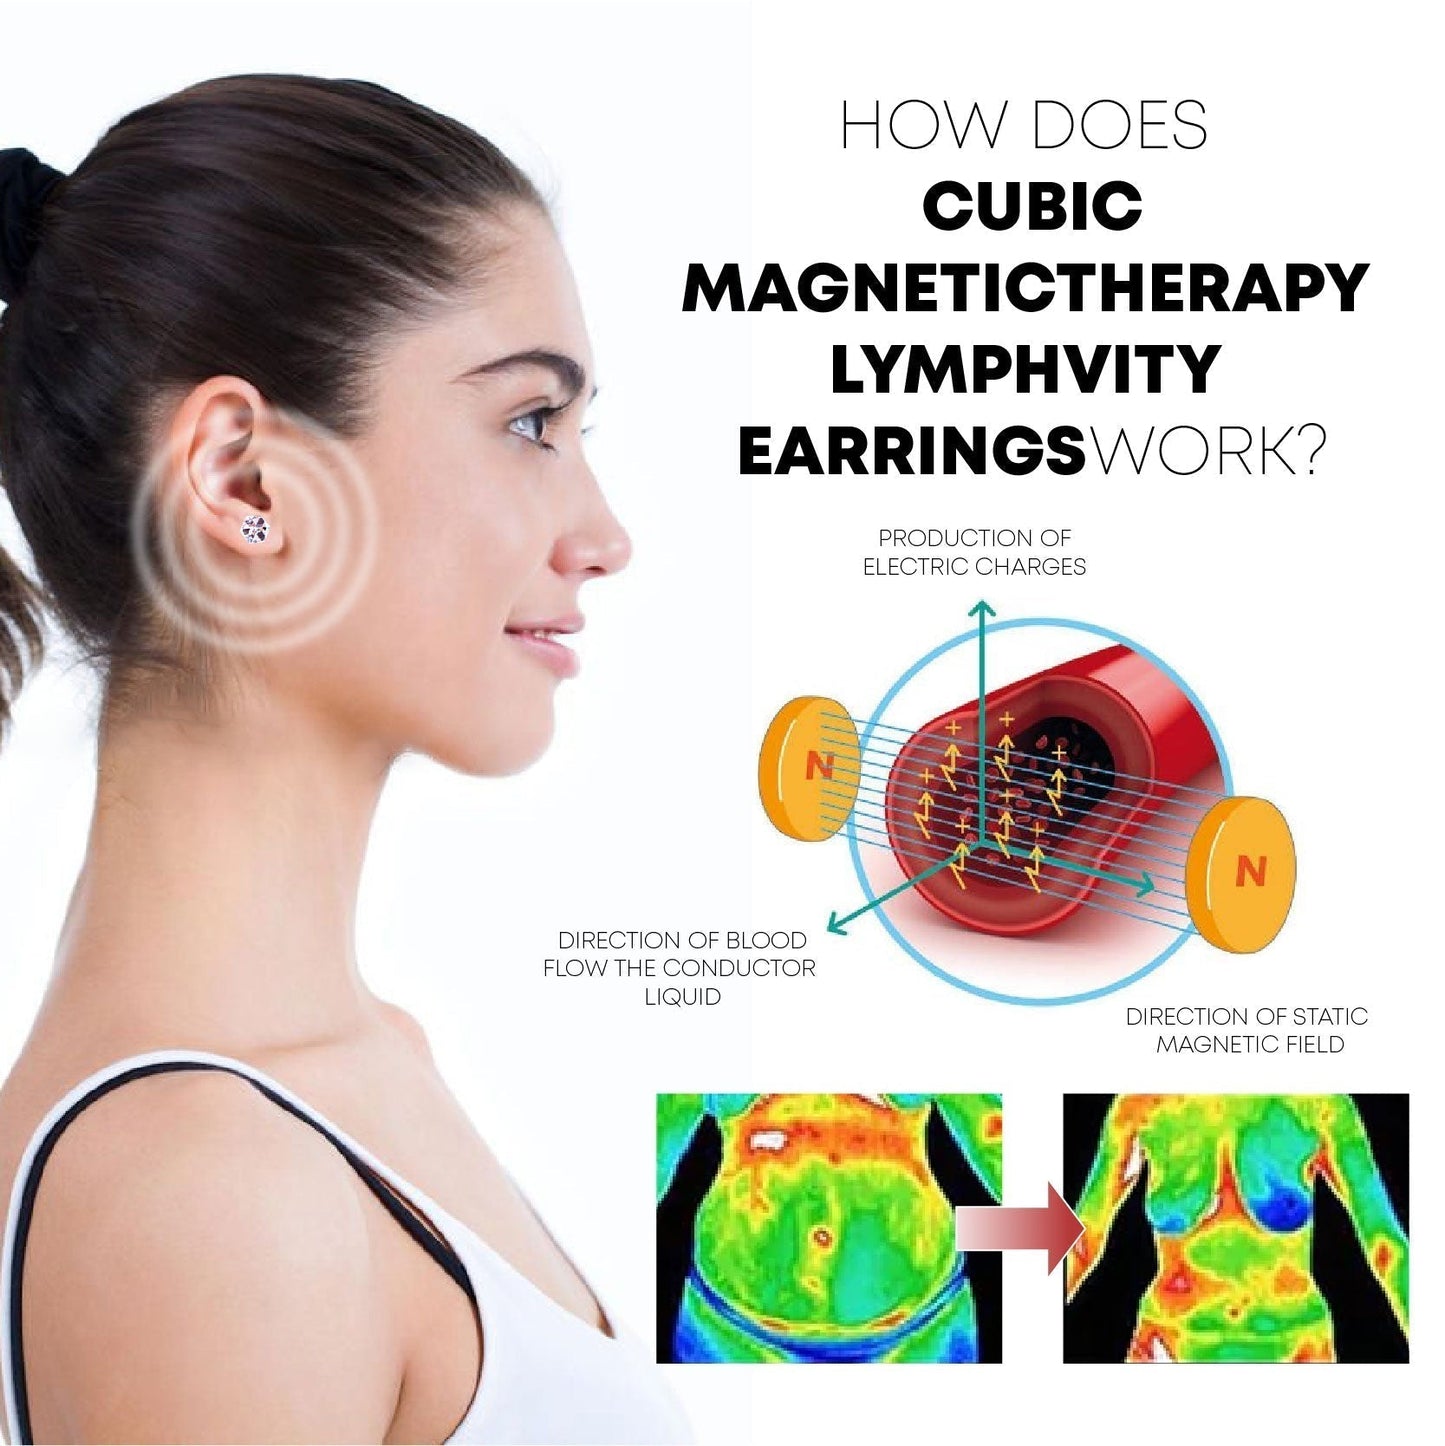 CUBIC Lymphvity MagneticTherapy EarStuds